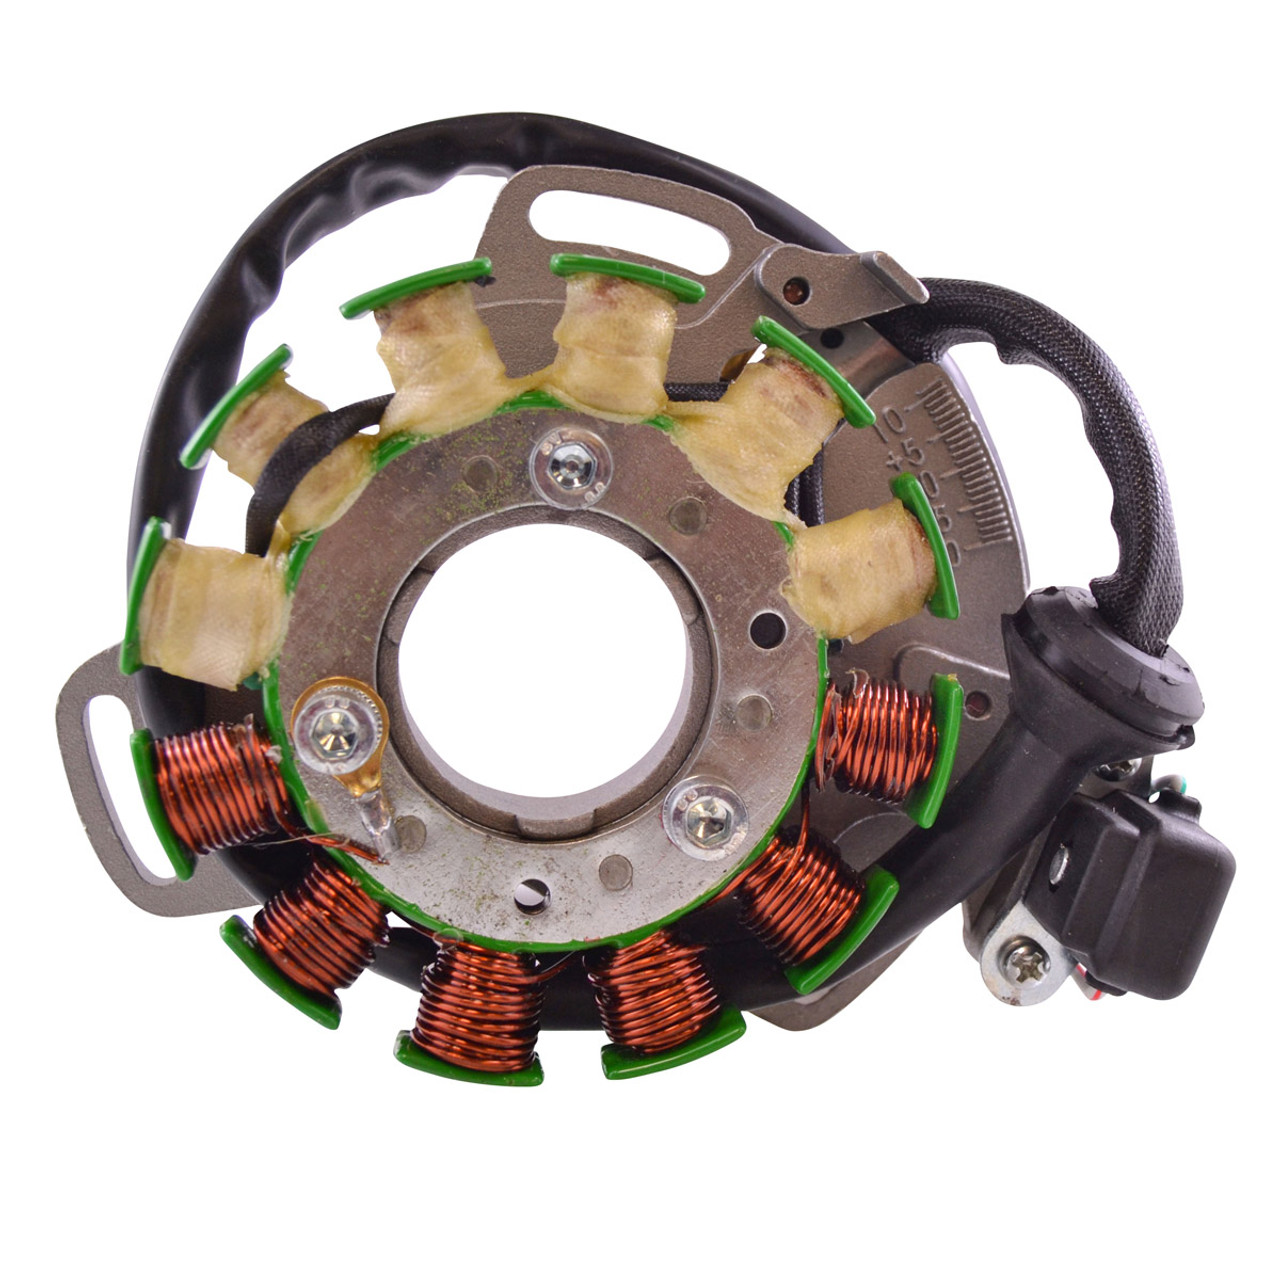 RMSTATOR New Aftermarket Yamaha Kit Stator 100 W + HP CDI + External Ignition Coil + Backplate + Puller, RM22851